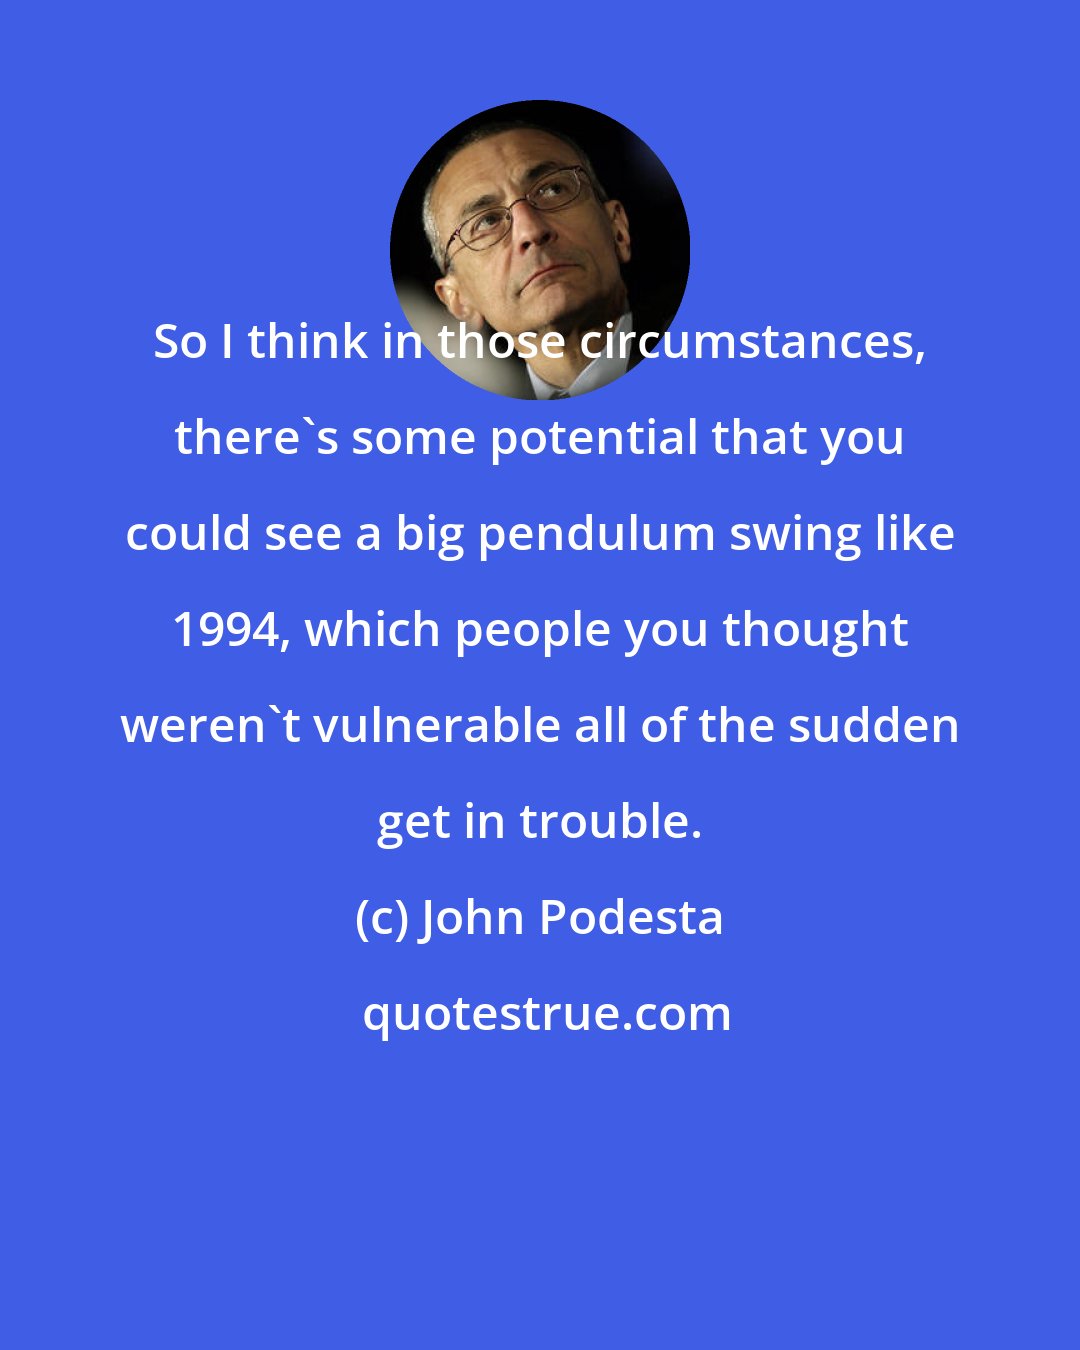 John Podesta: So I think in those circumstances, there's some potential that you could see a big pendulum swing like 1994, which people you thought weren't vulnerable all of the sudden get in trouble.